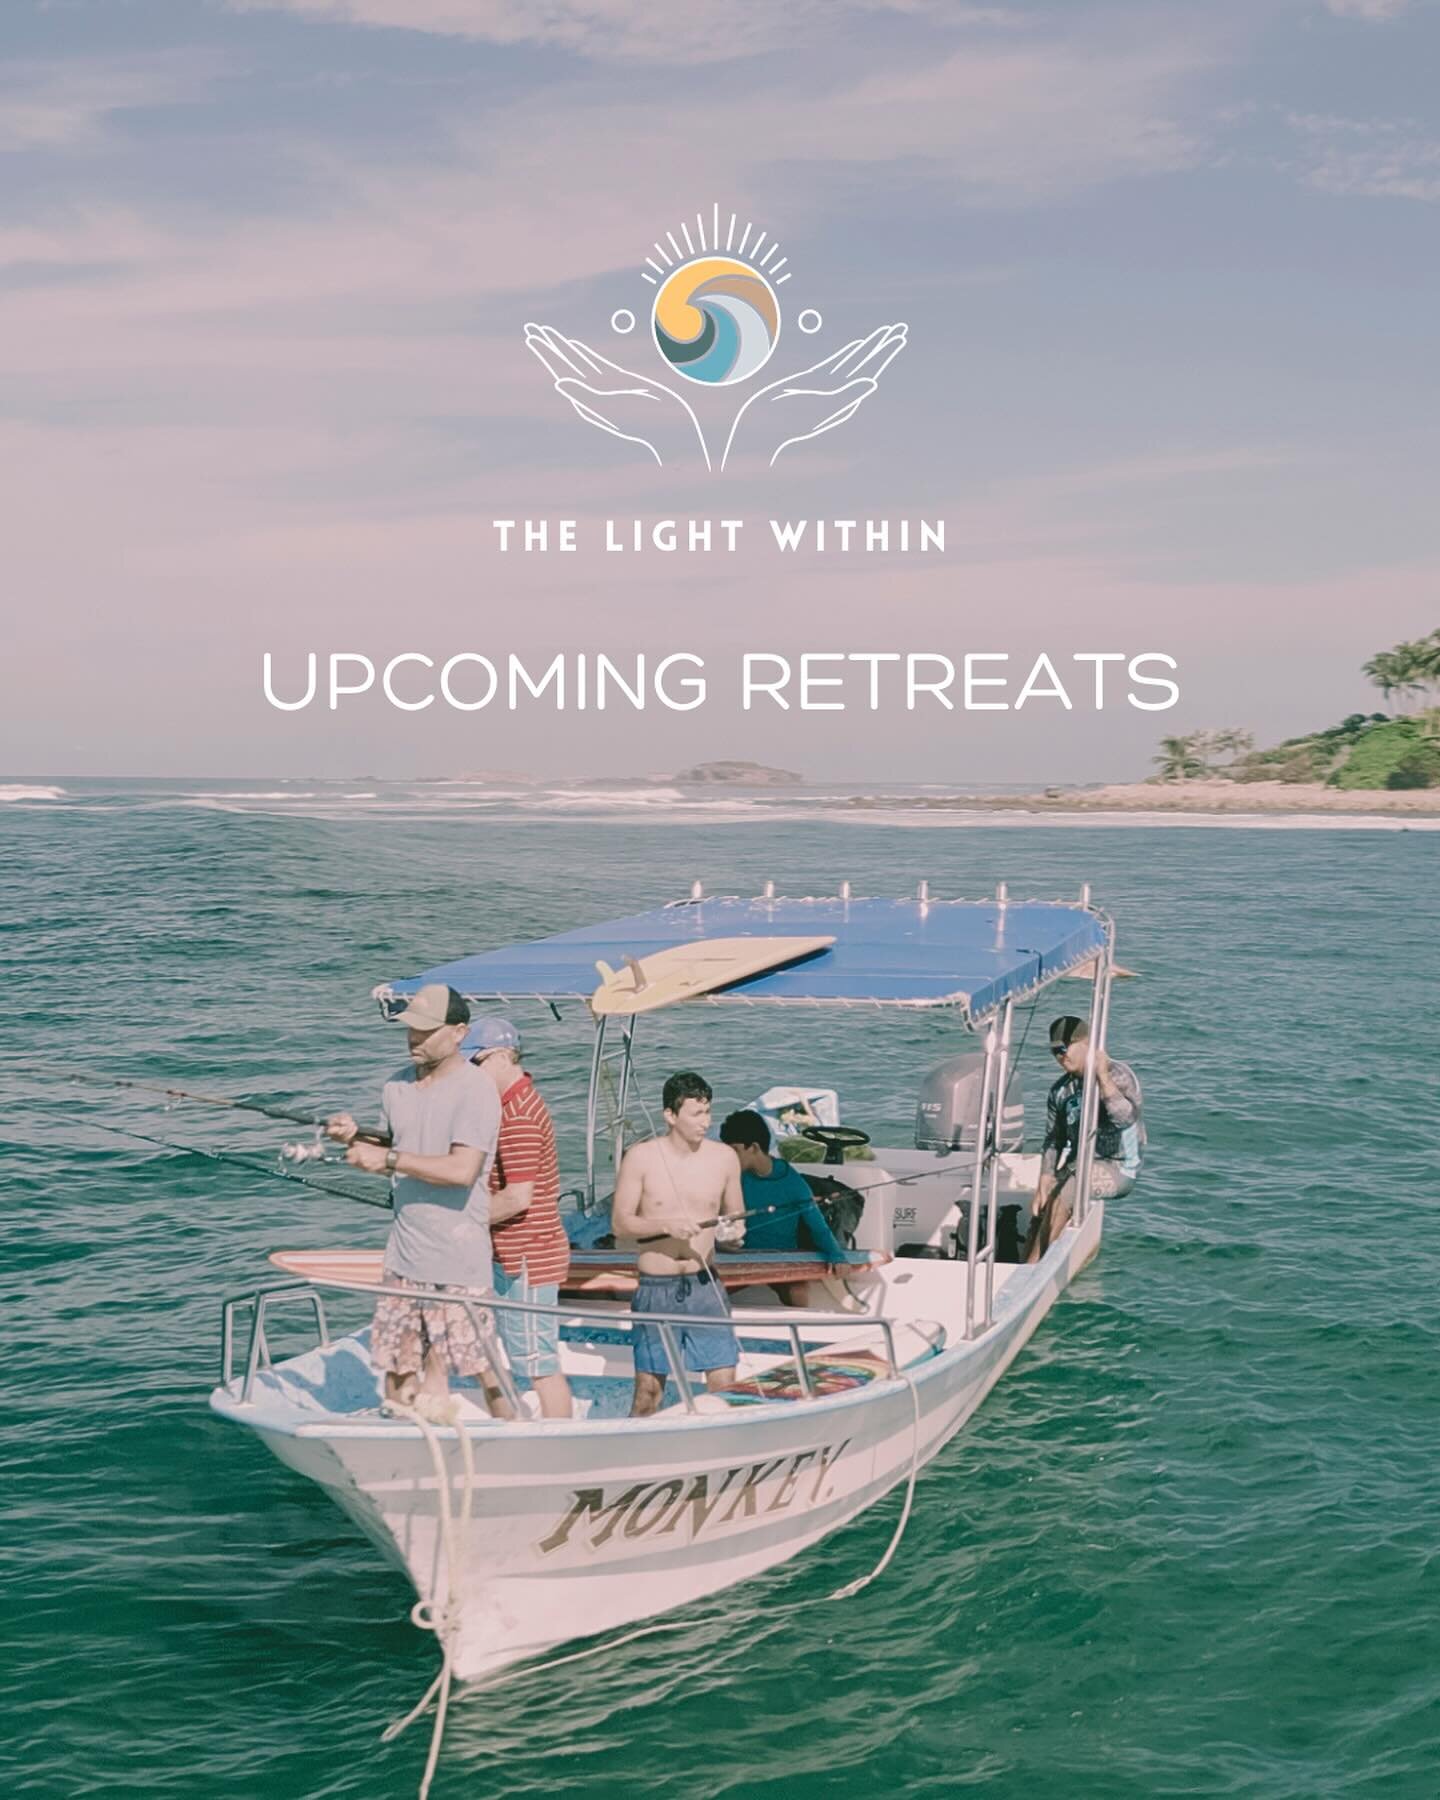 At The Light Within Retreats, our programs have been designed to transform grief, stress, depression and trauma by embracing the power of human connection through shared experiences and mindfulness.

📣
In 2024 we have five curated retreats designed 